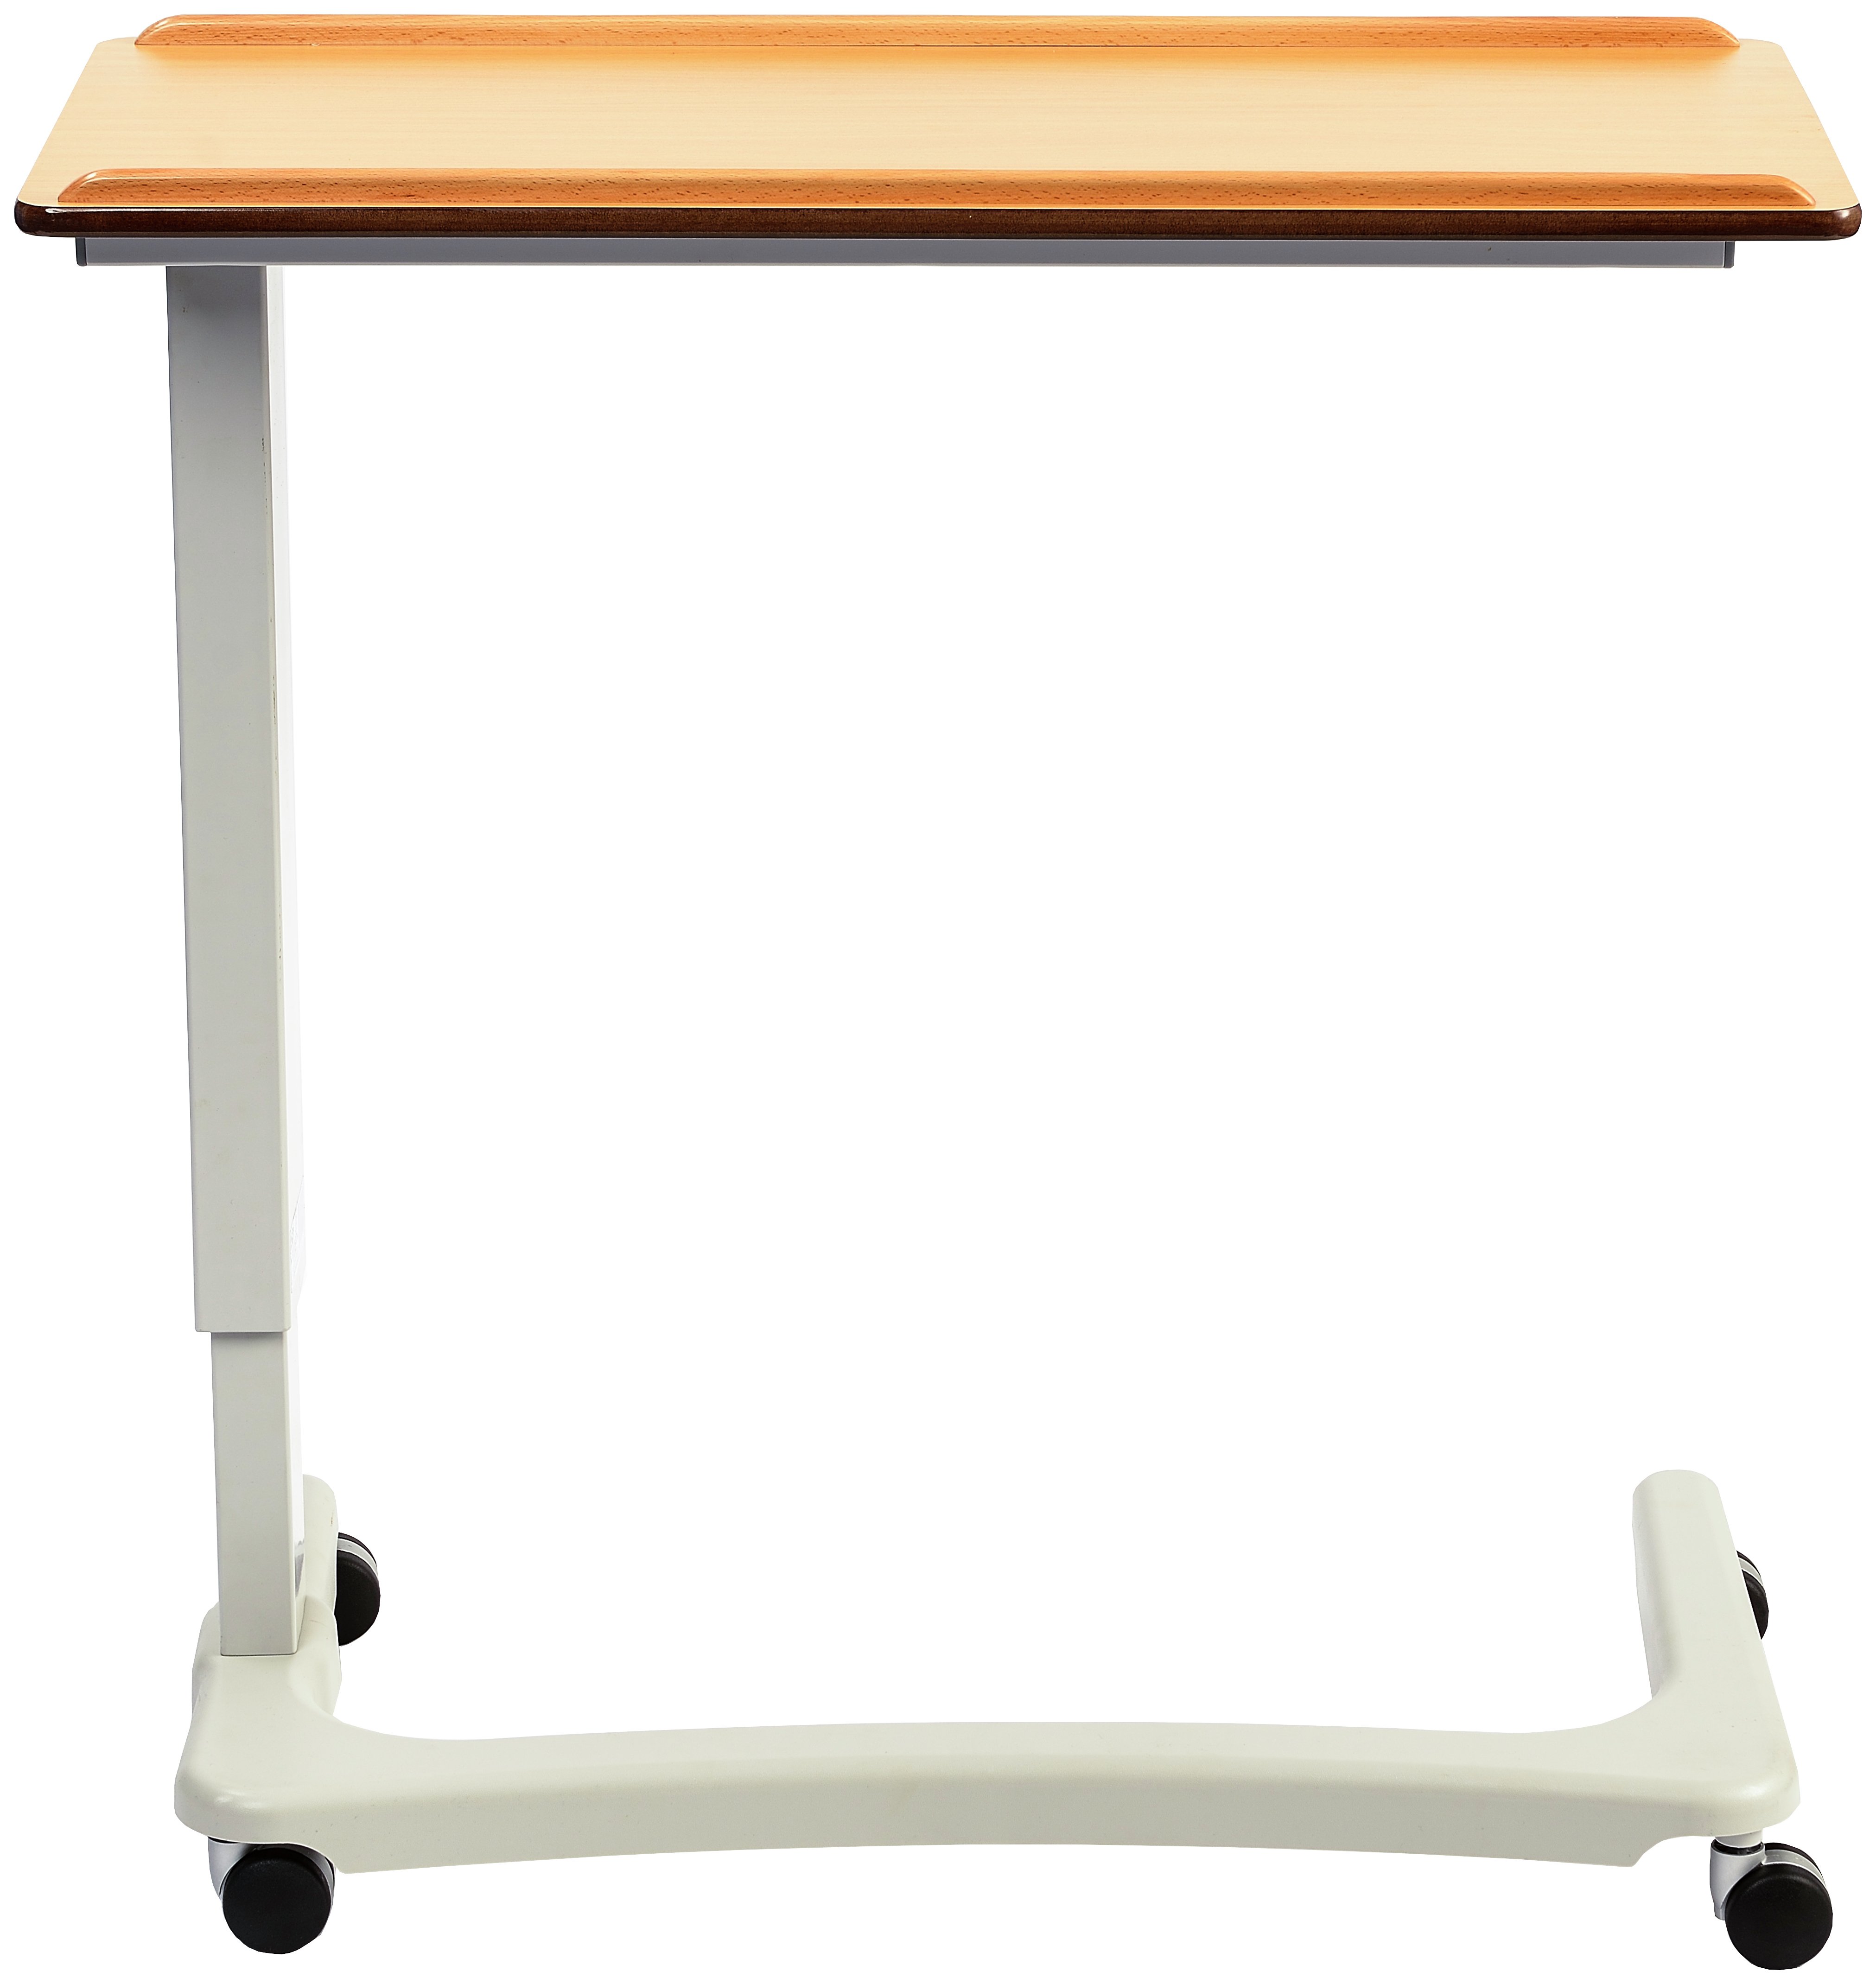 NRS Assisted Lift Overbed Table review